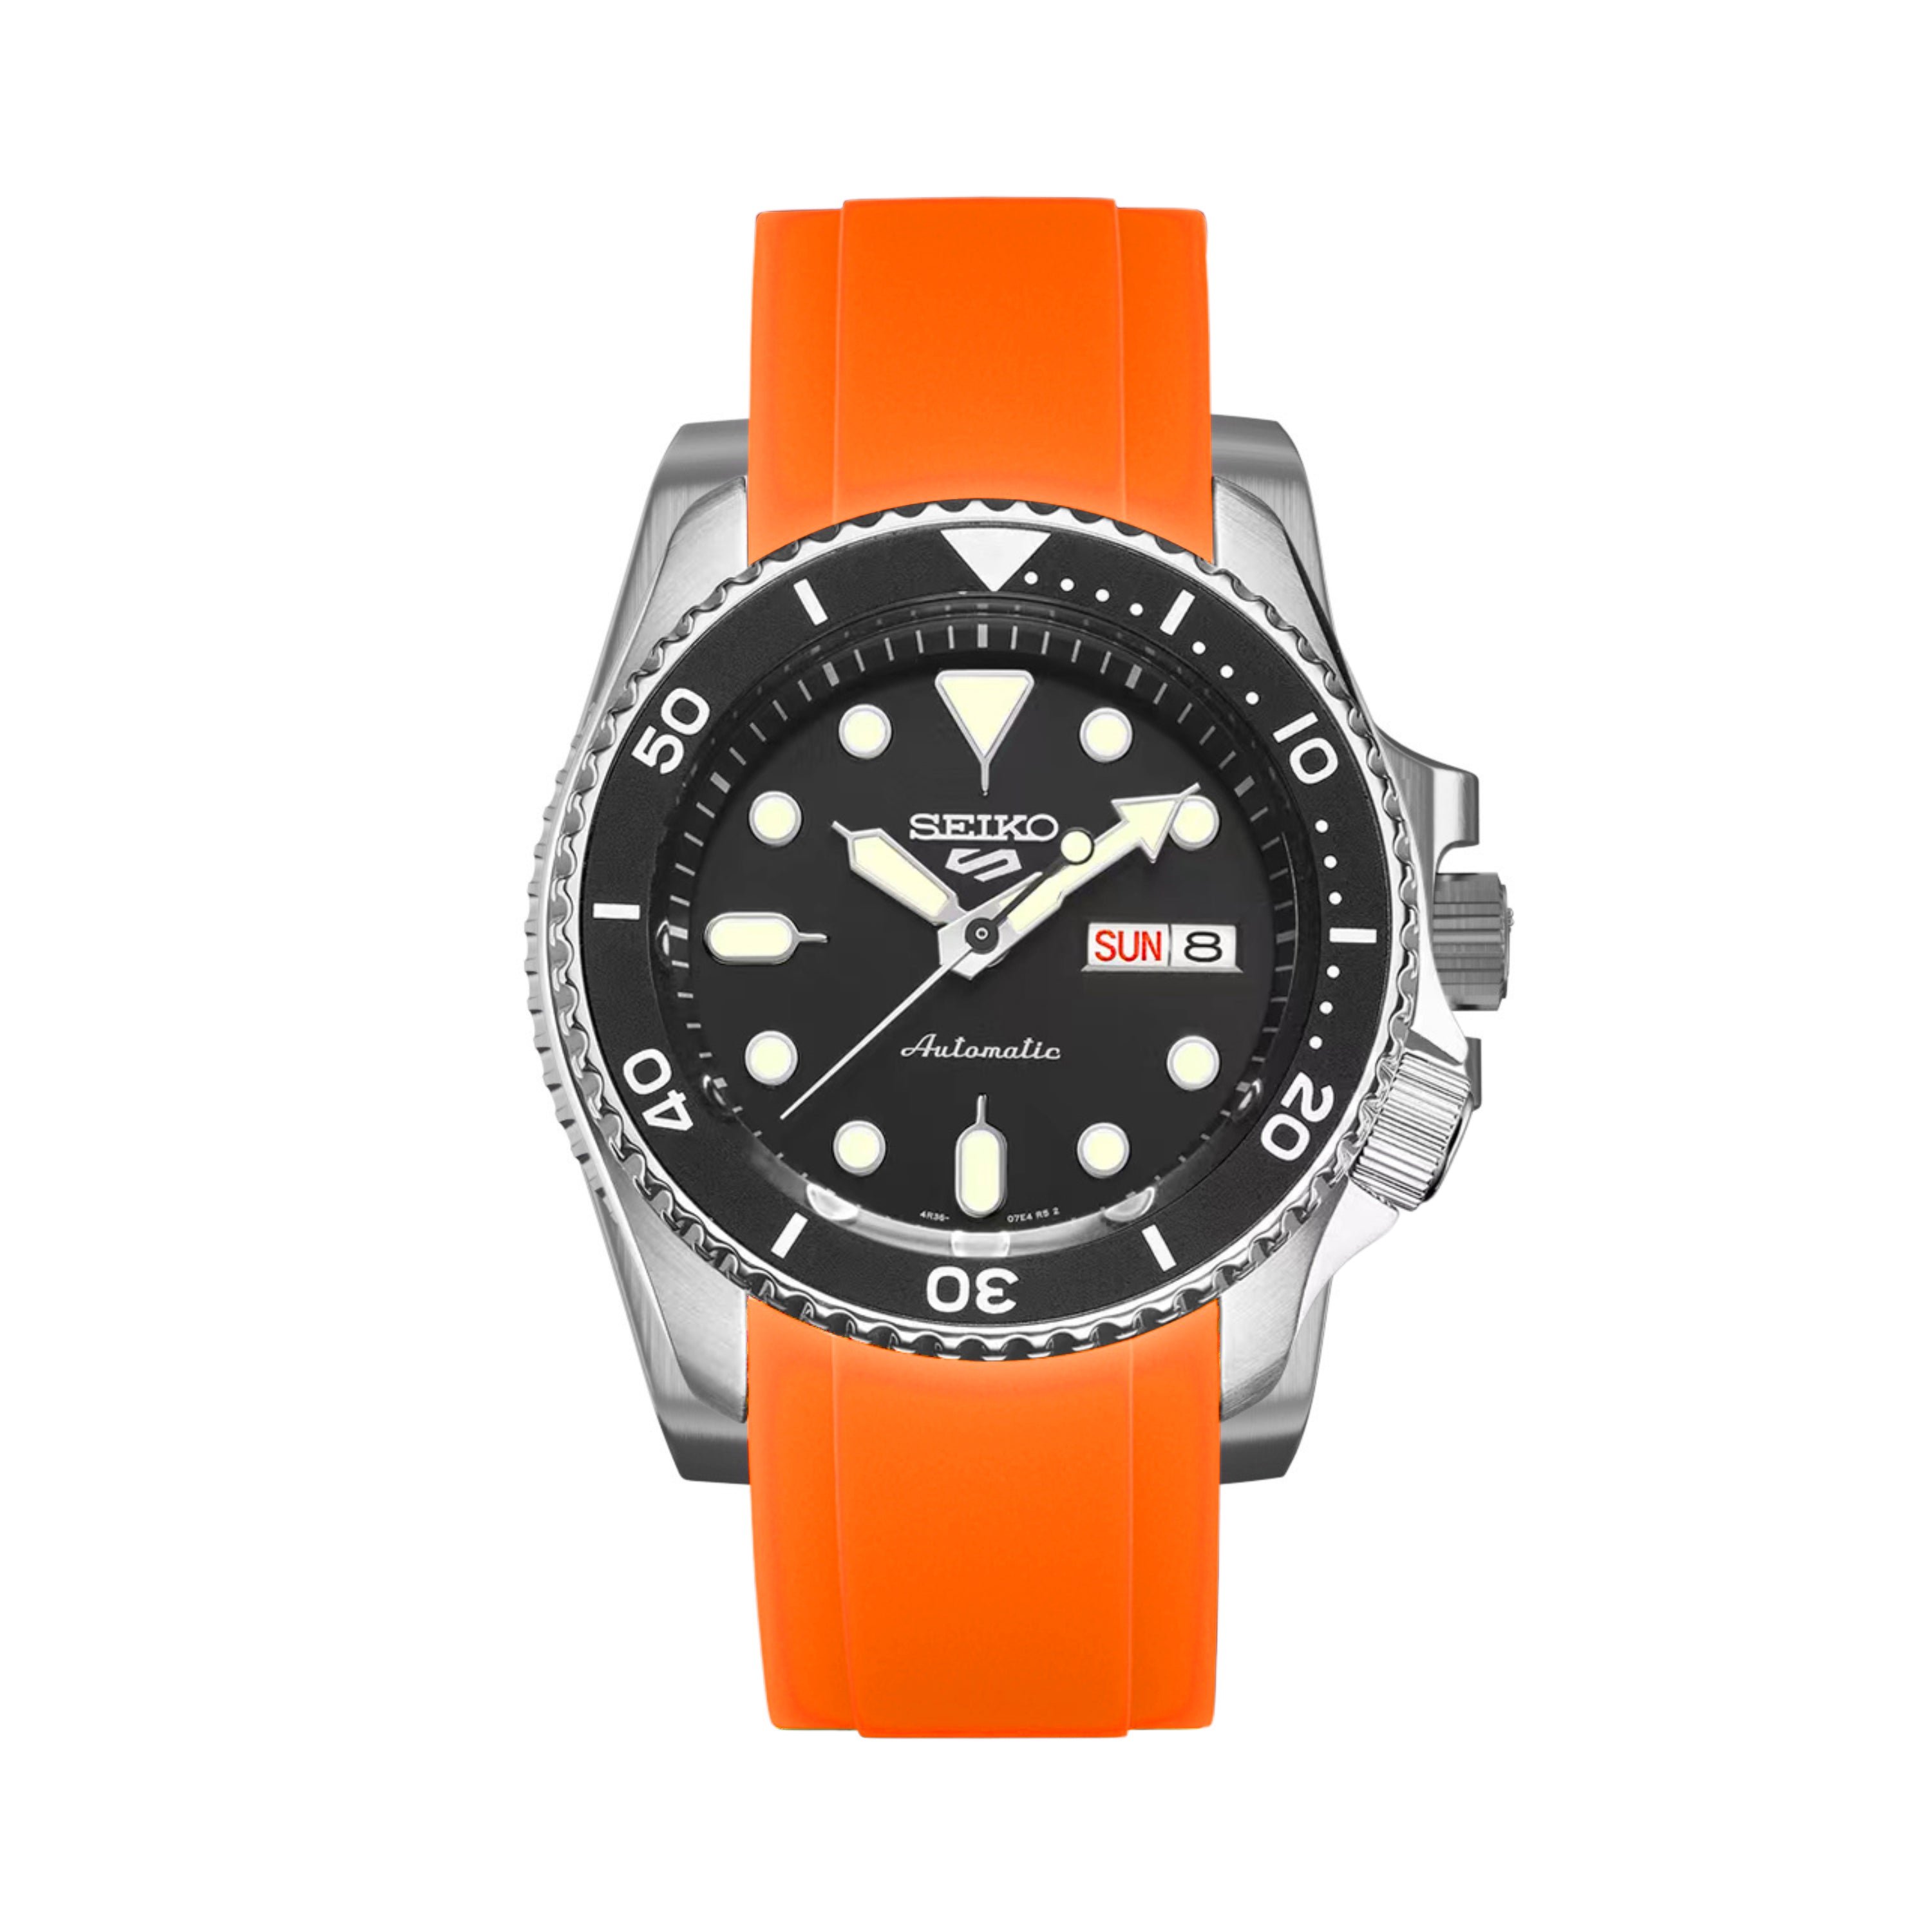 Curved End Soft Silicone Strap - Compatible with Seiko 5 Sports – Orange (2418)